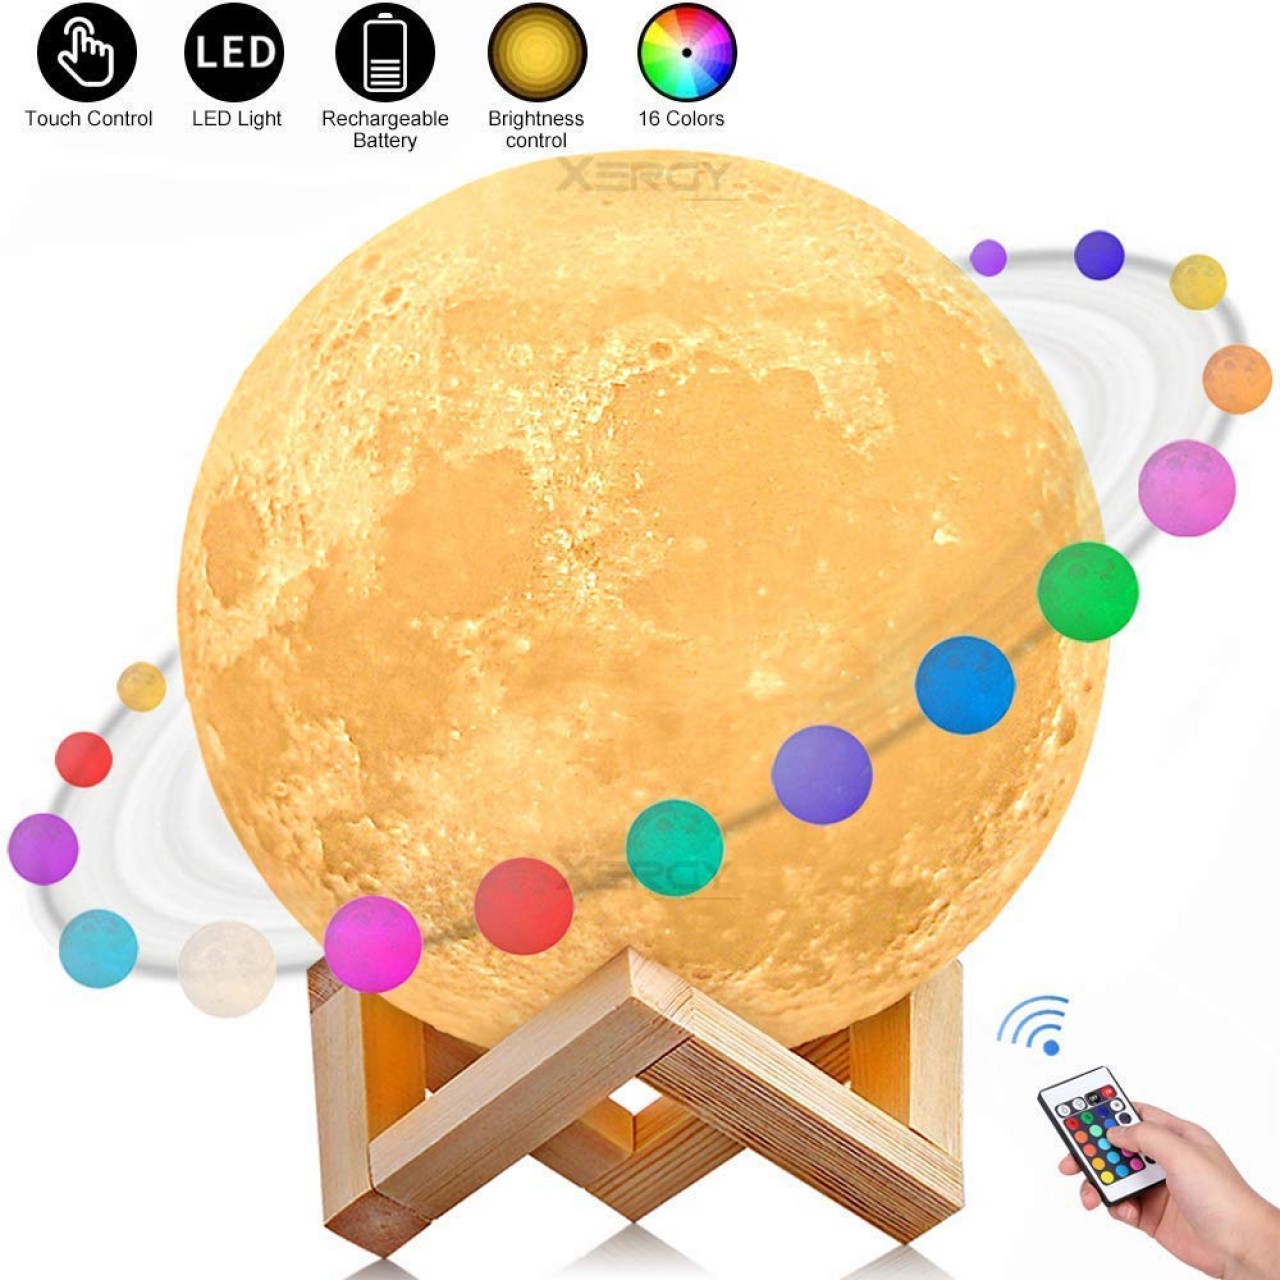 Personalised 16 Colors 3D Moon LED Lamp With Remote